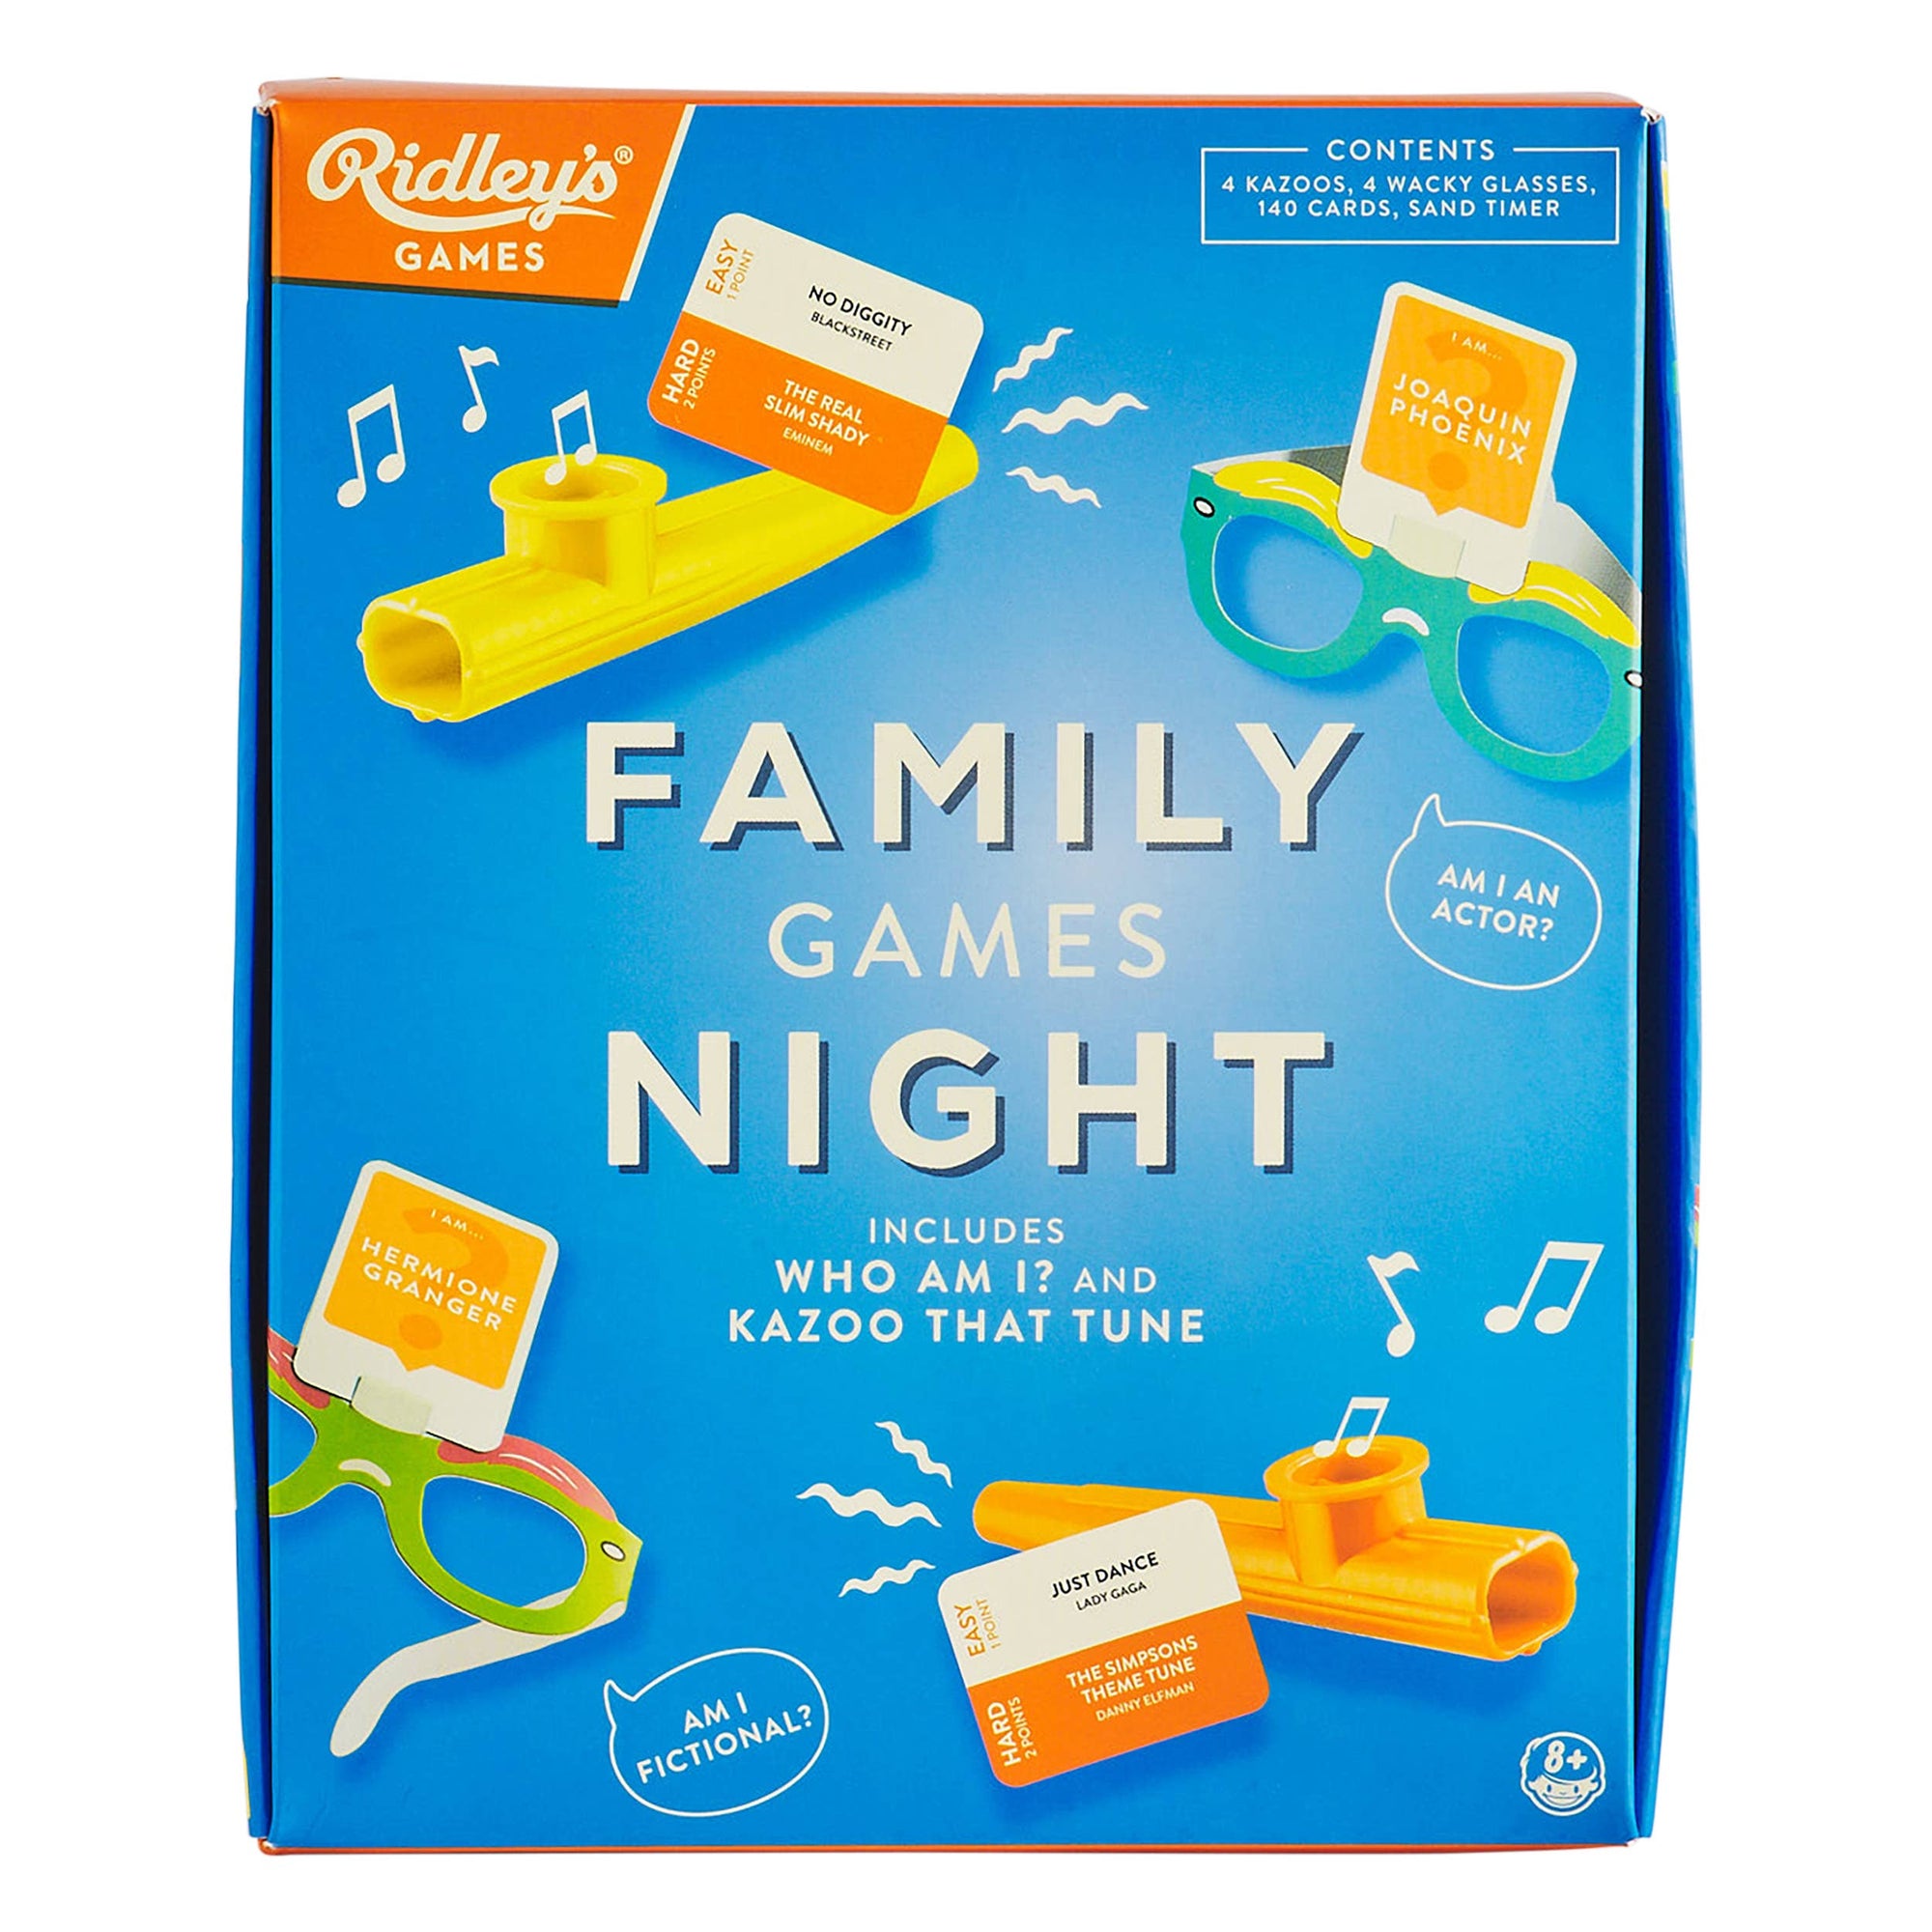 Join us for a fun-filled Family Game Night, where we will be playing exciting games like Who Am I and Kazoo That Tune.